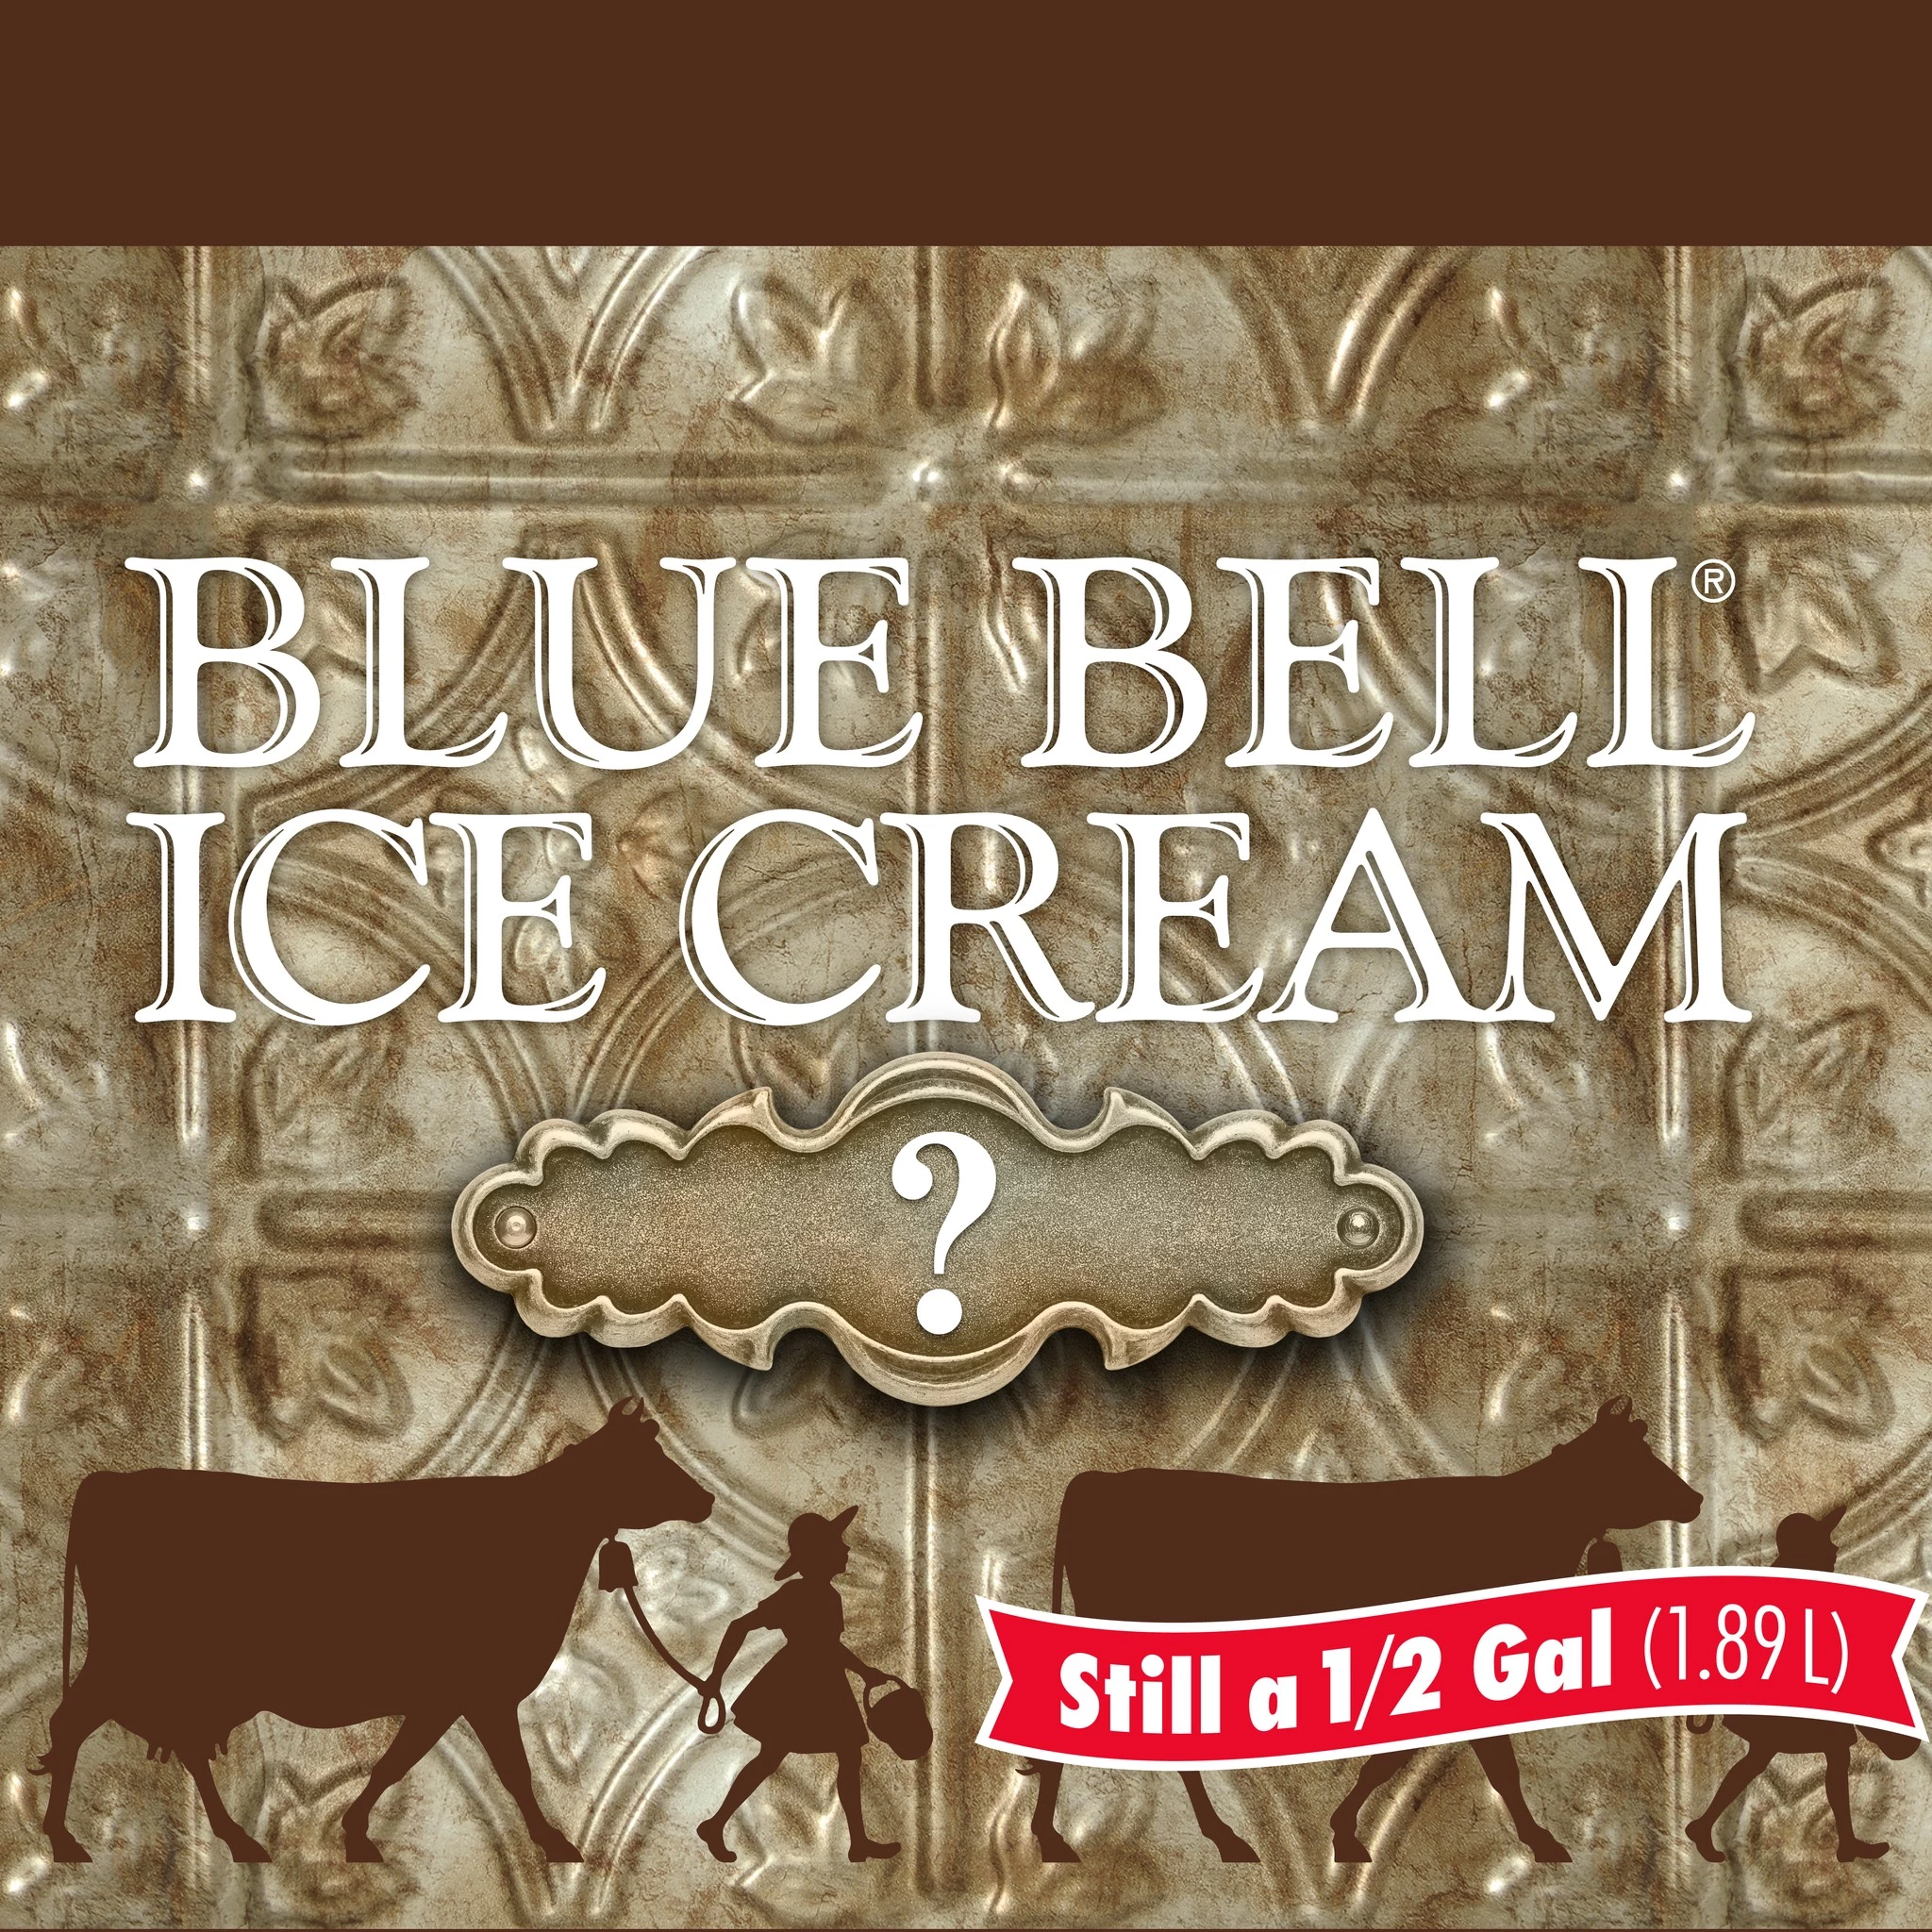 Blue Bell's 'Bride's Cake' coming down the grocery aisle | wgrz.com